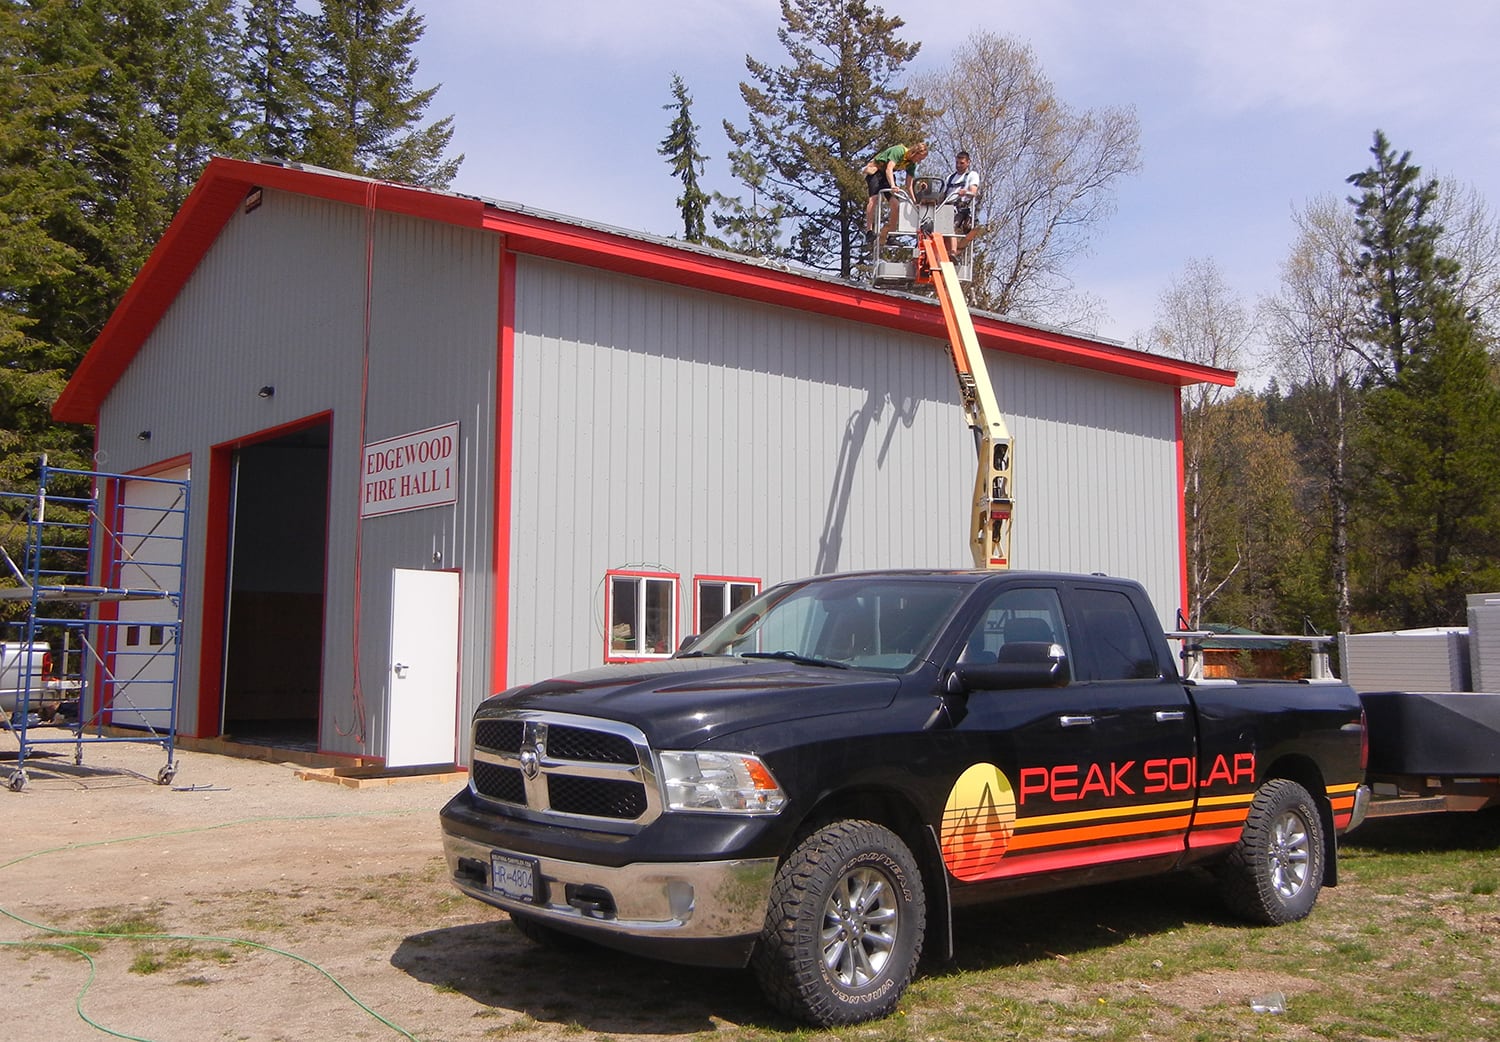 Edgewood Firehall turns on a new source of power